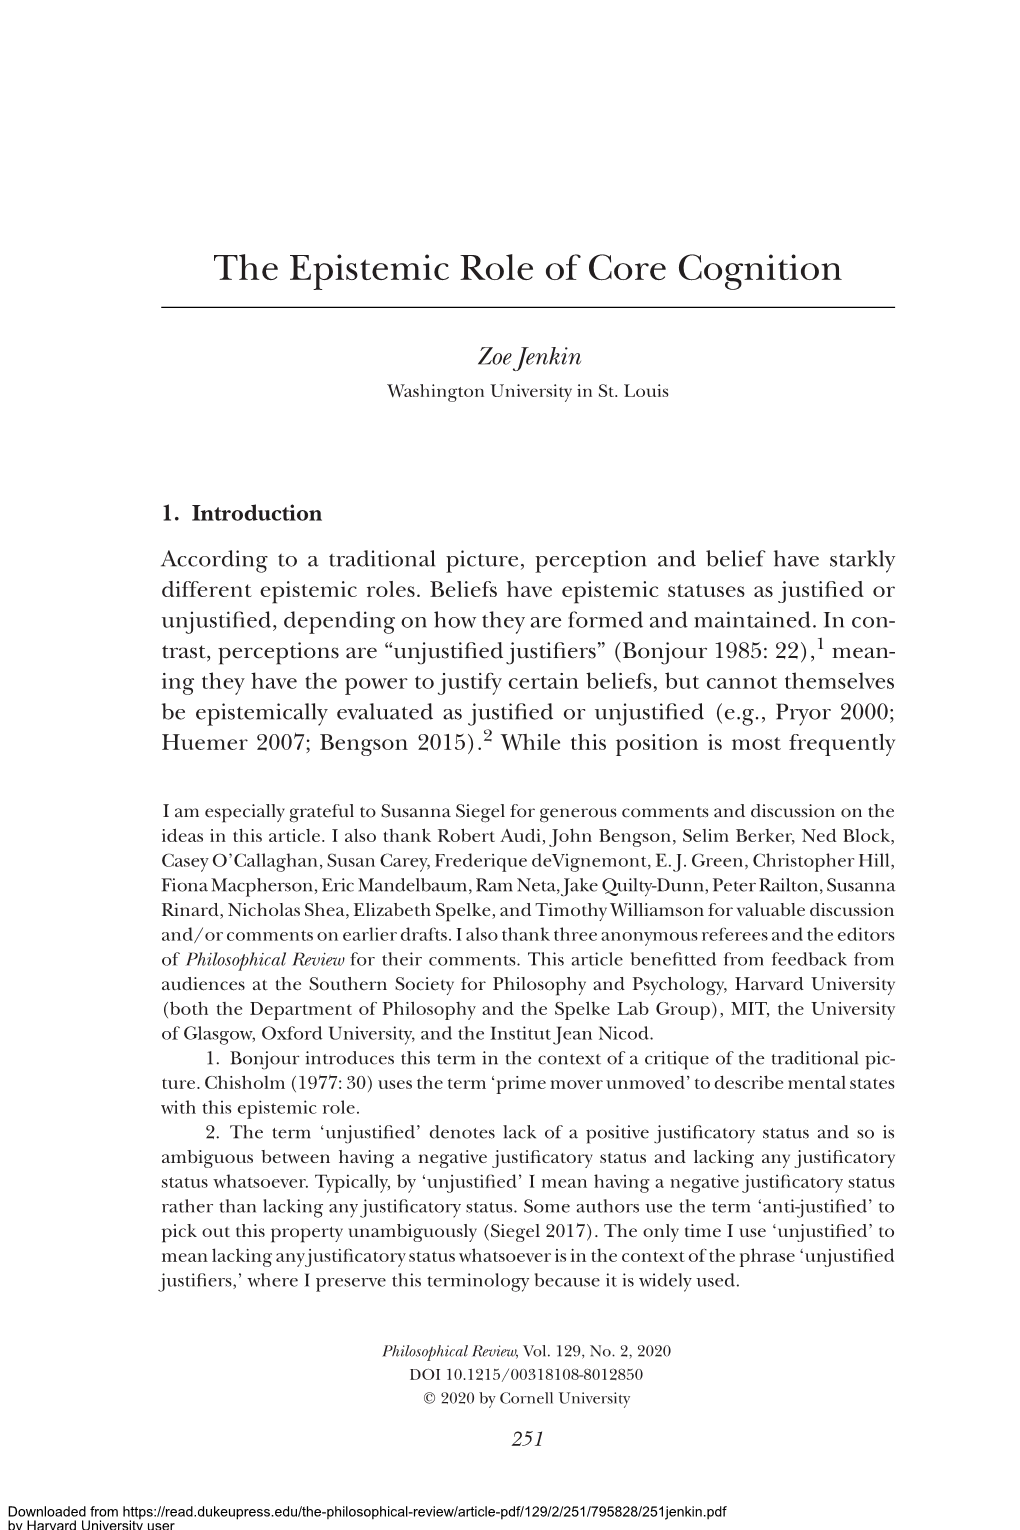 The Epistemic Role of Core Cognition